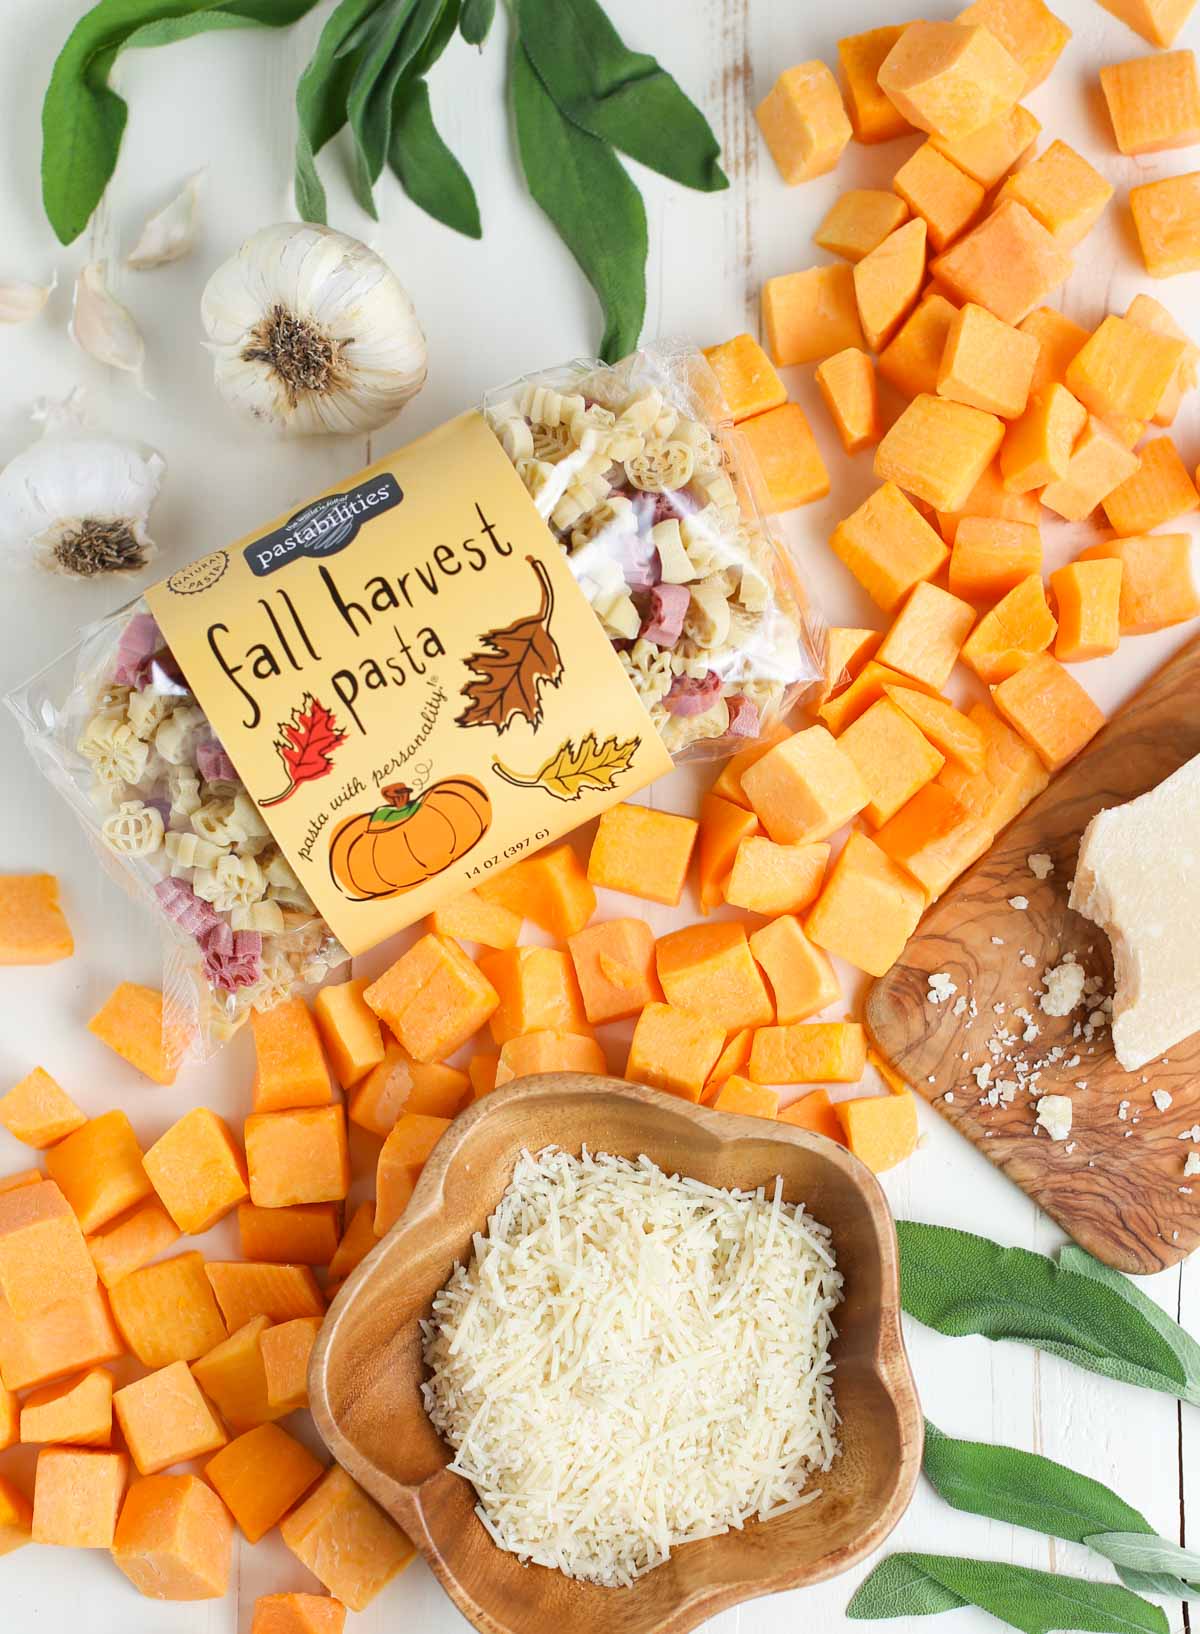 Butternut Squash Alfredo | Beautiful display of ingredients loose including a bag of Fall Harvest Pasta